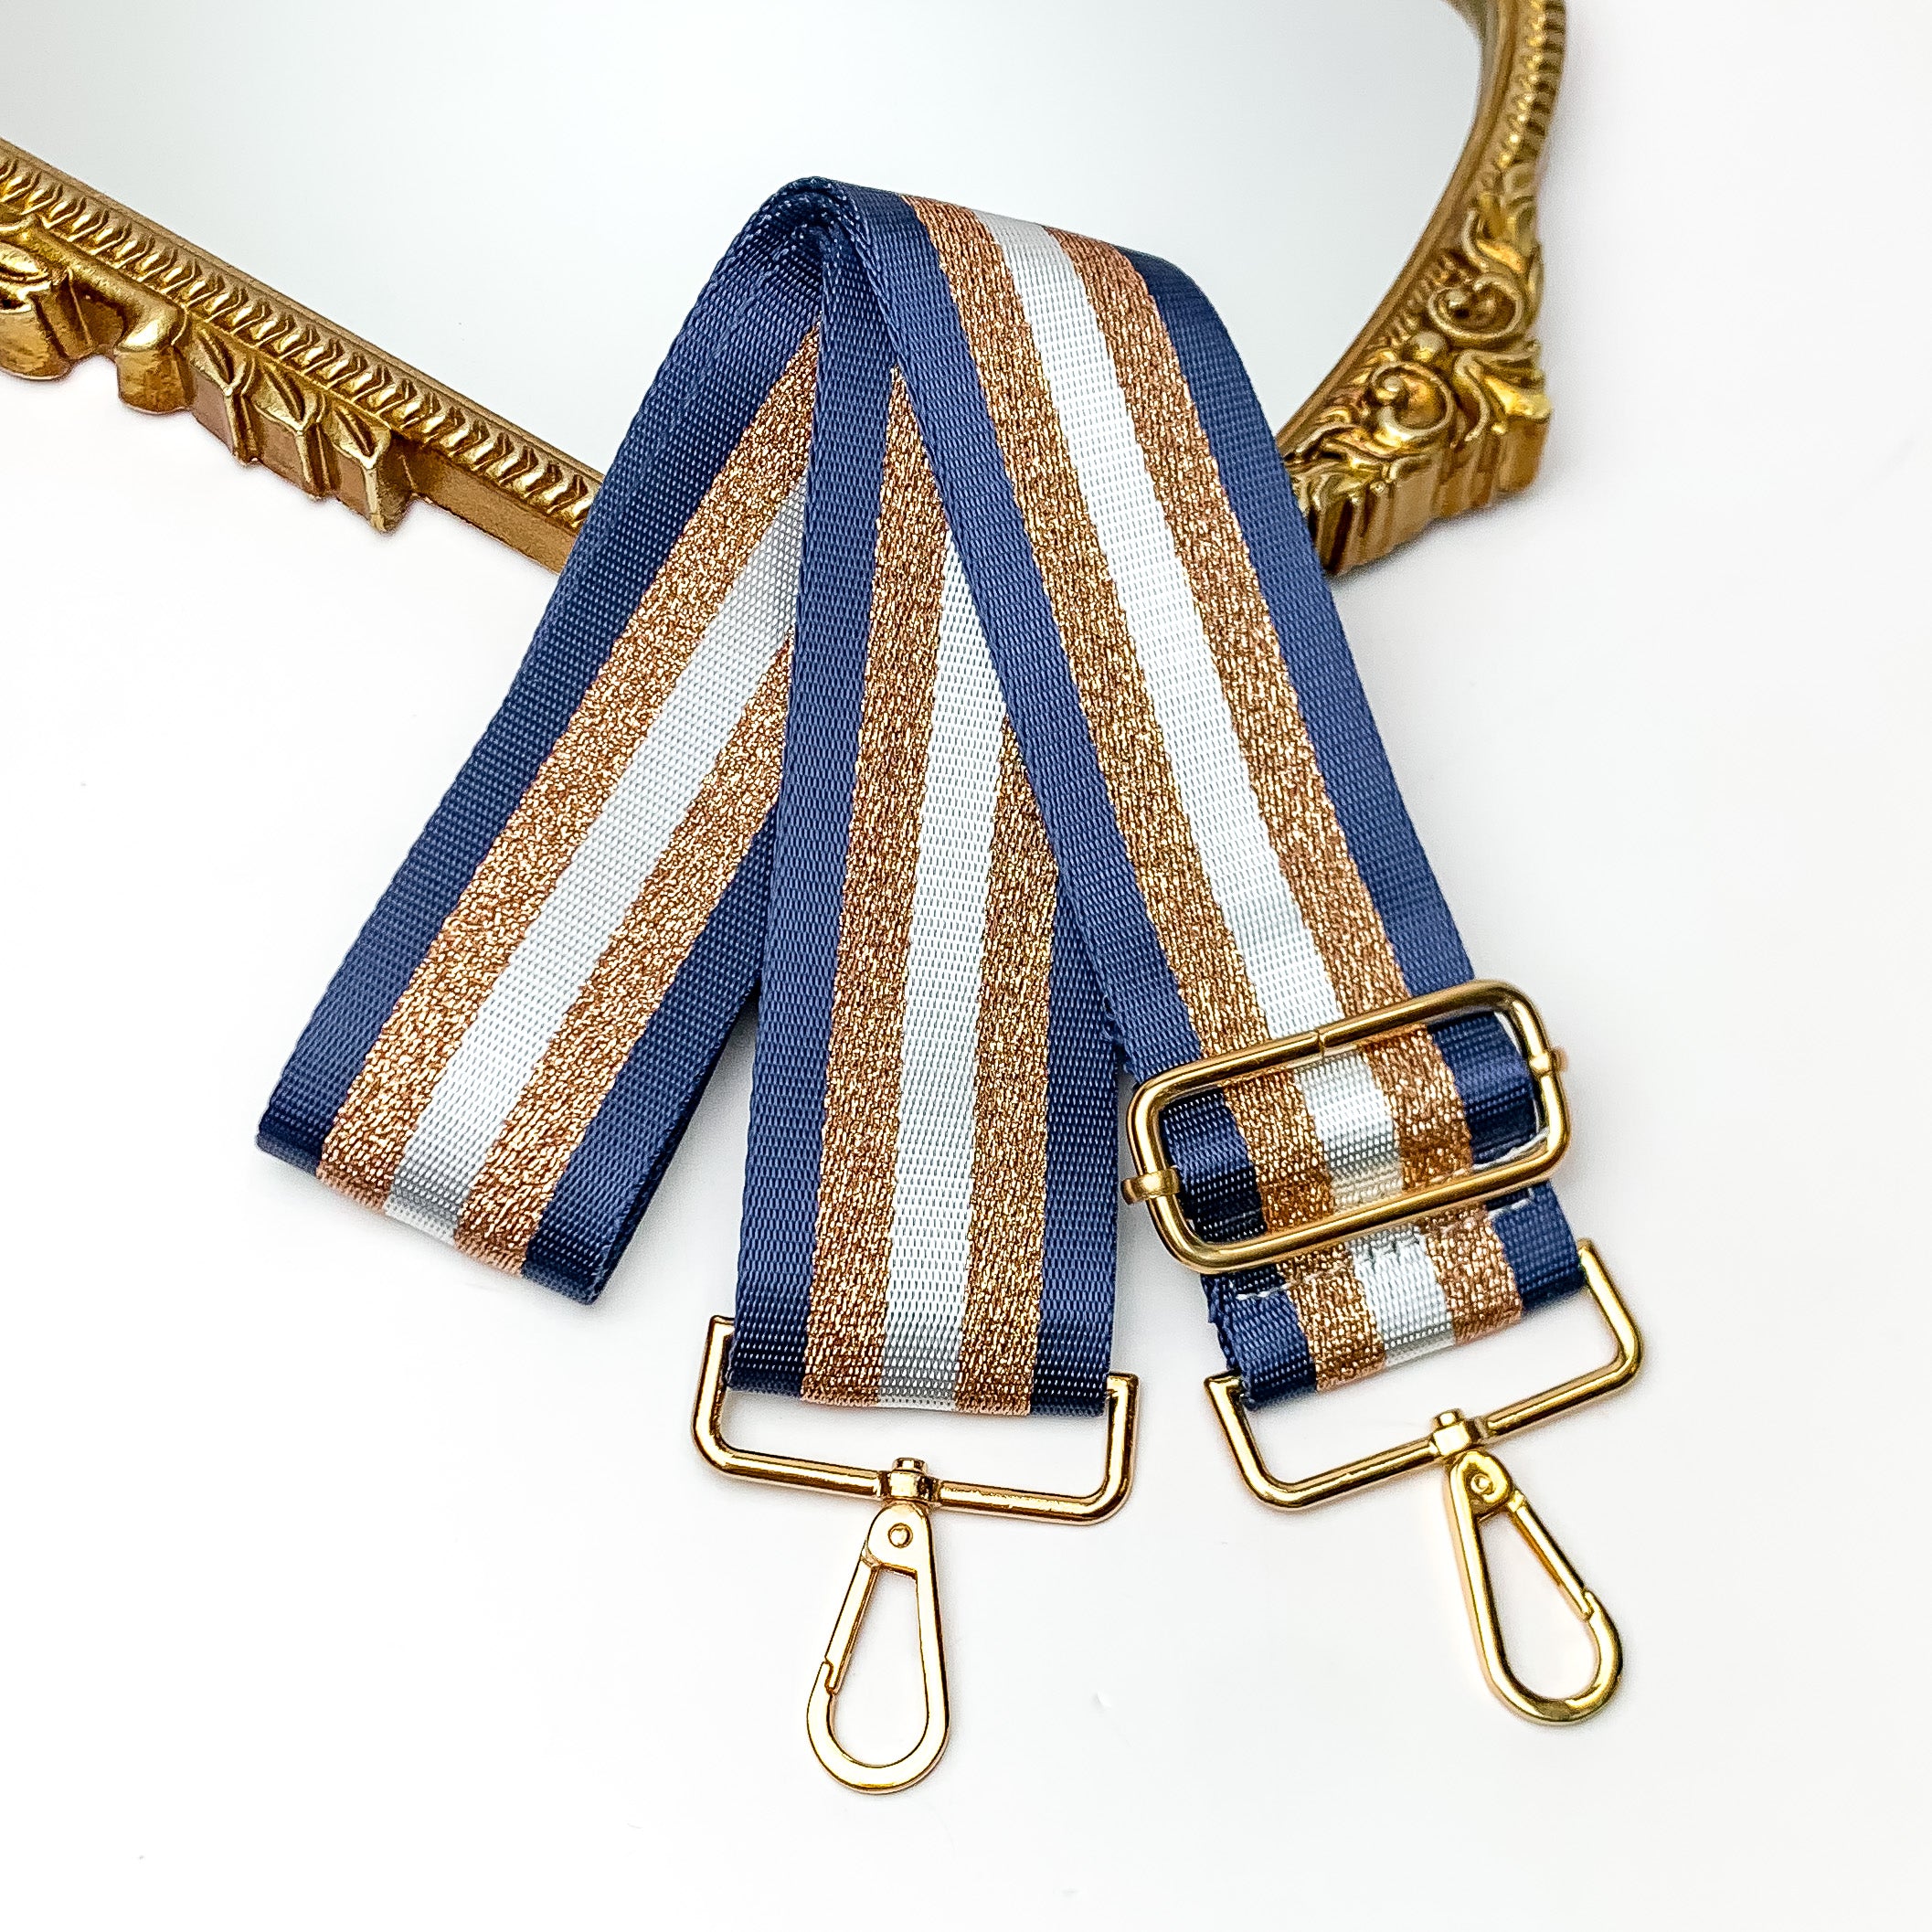 Striped Adjustable Purse Strap in Navy Blue. This bag strap is on a white background with a gold trimmed mirror in the top corner.